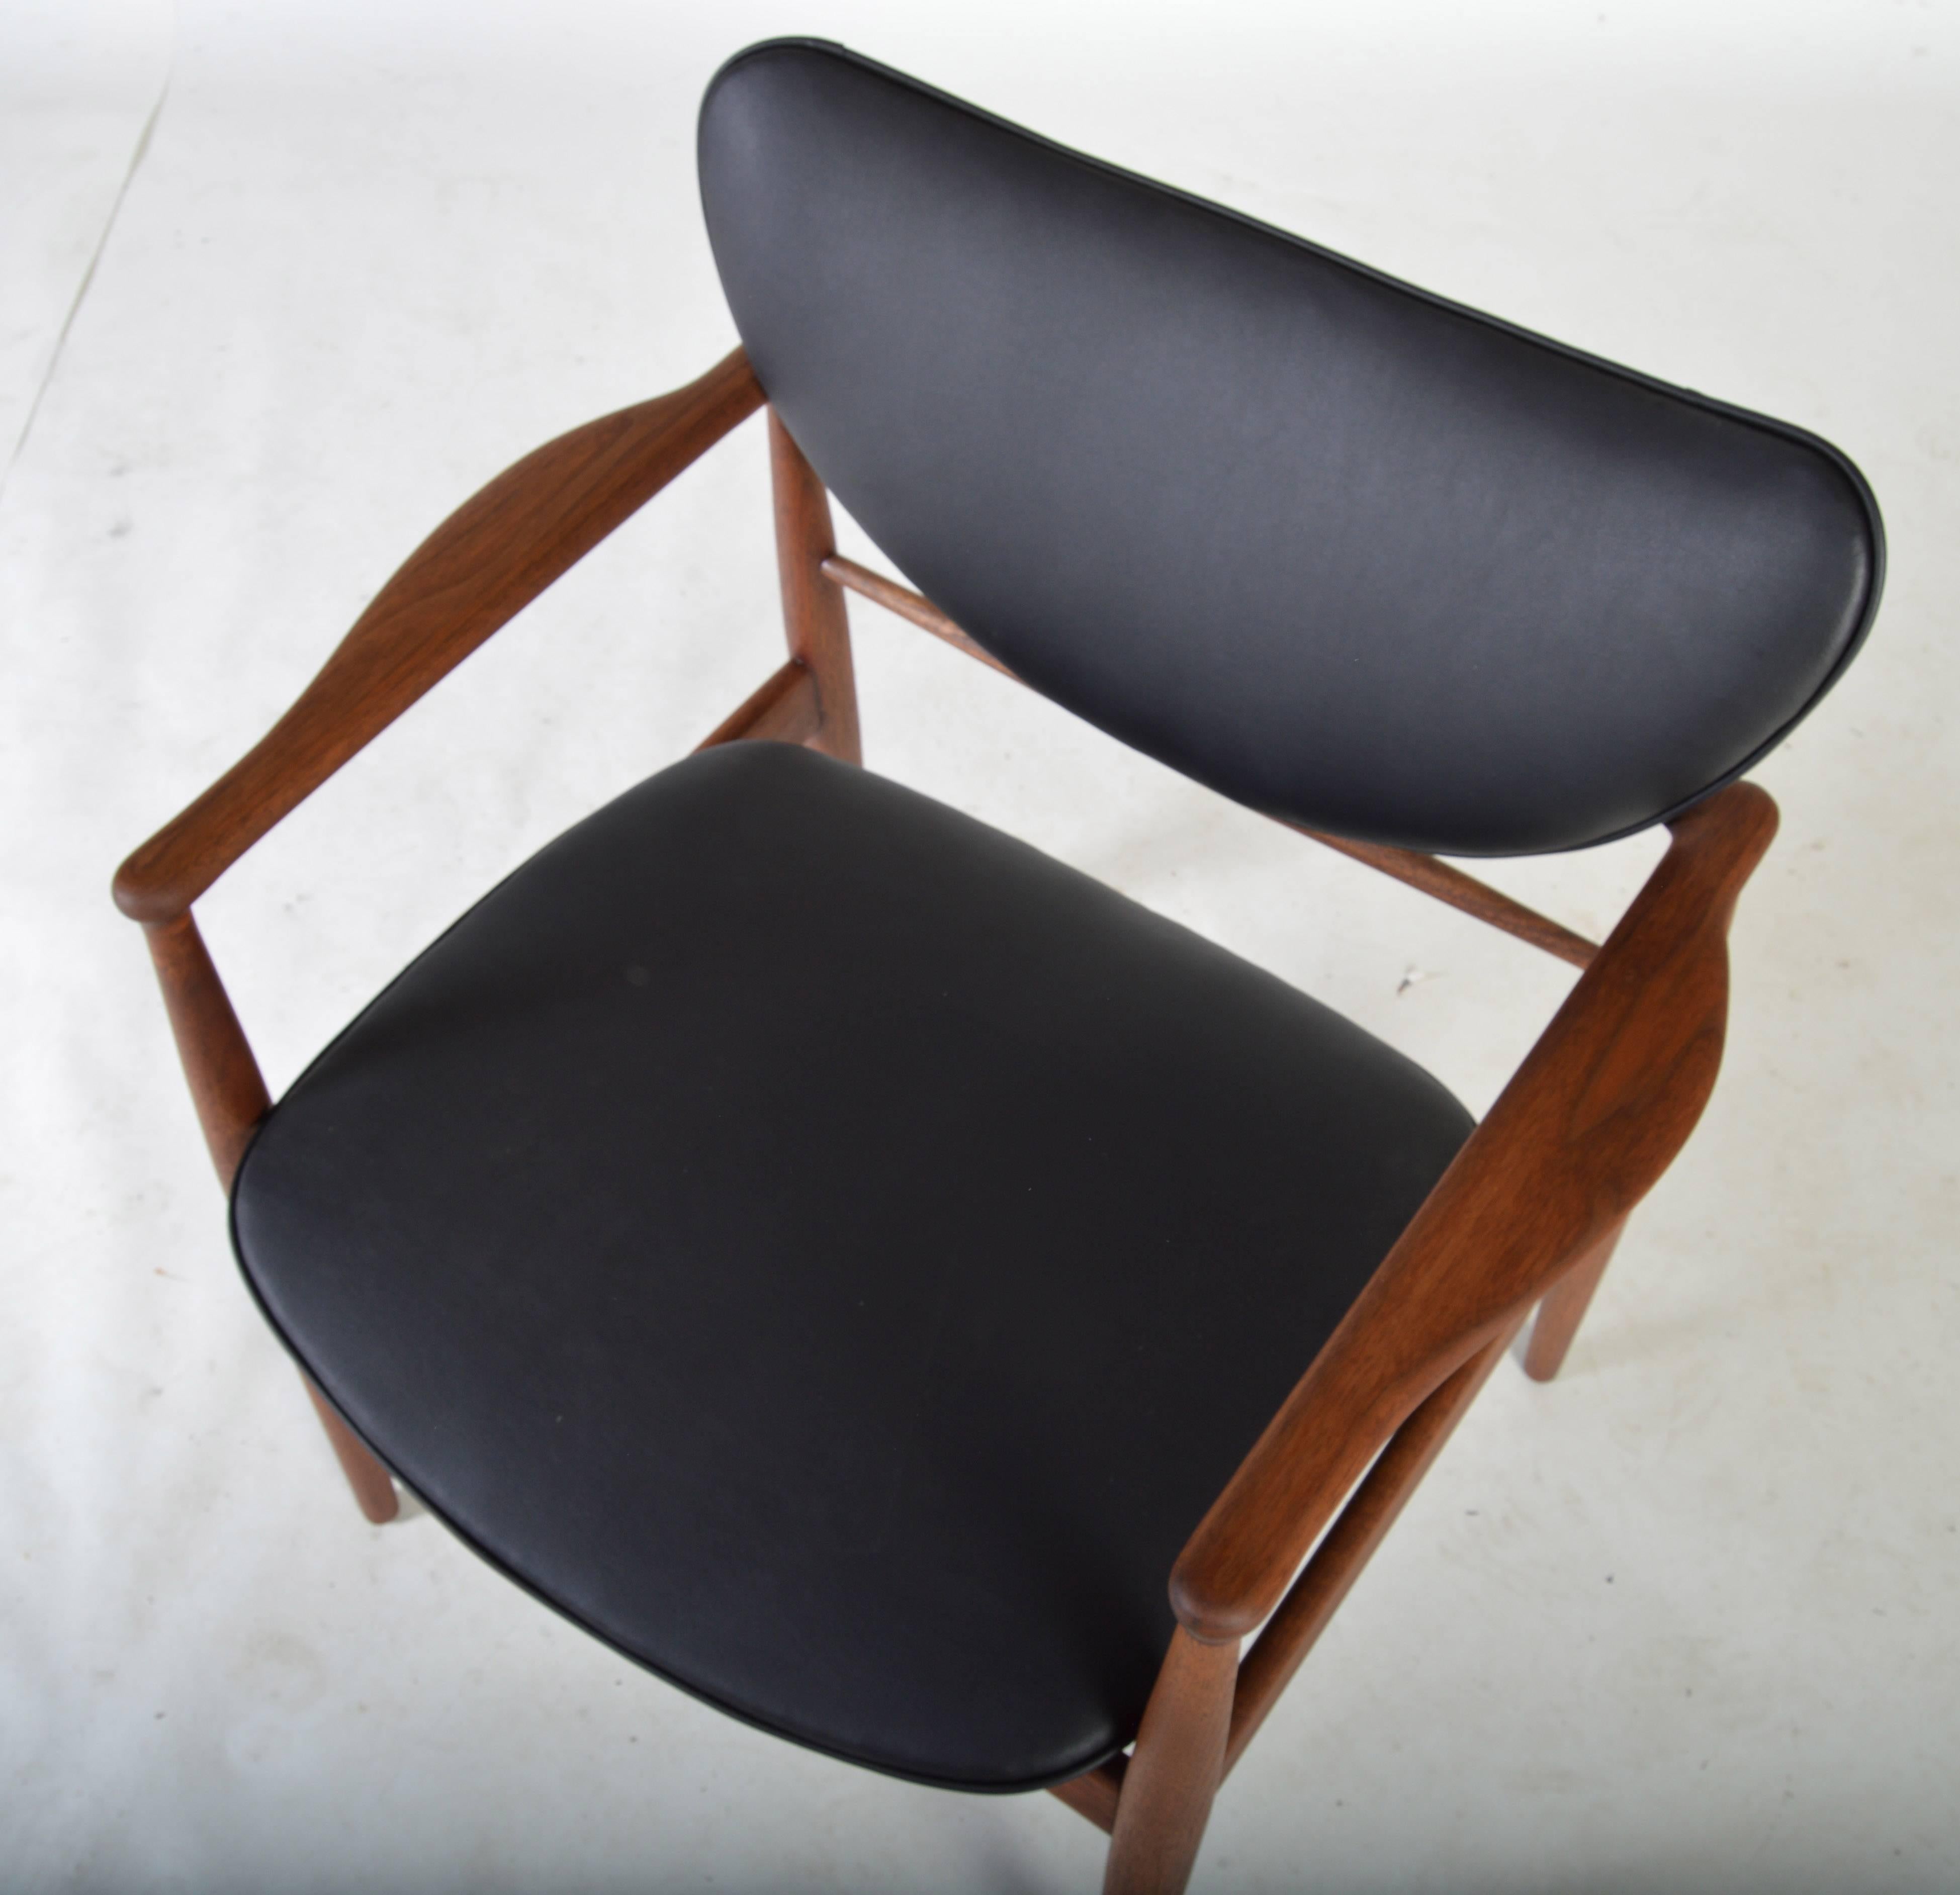 A stunning design by a true master. The no. 48 open armchair is a true favorite having walnut frame and sexy black leather curved backrest and seat. Newly reupholstered for the new owner to break in. Wood in excellent condition. Well maintained